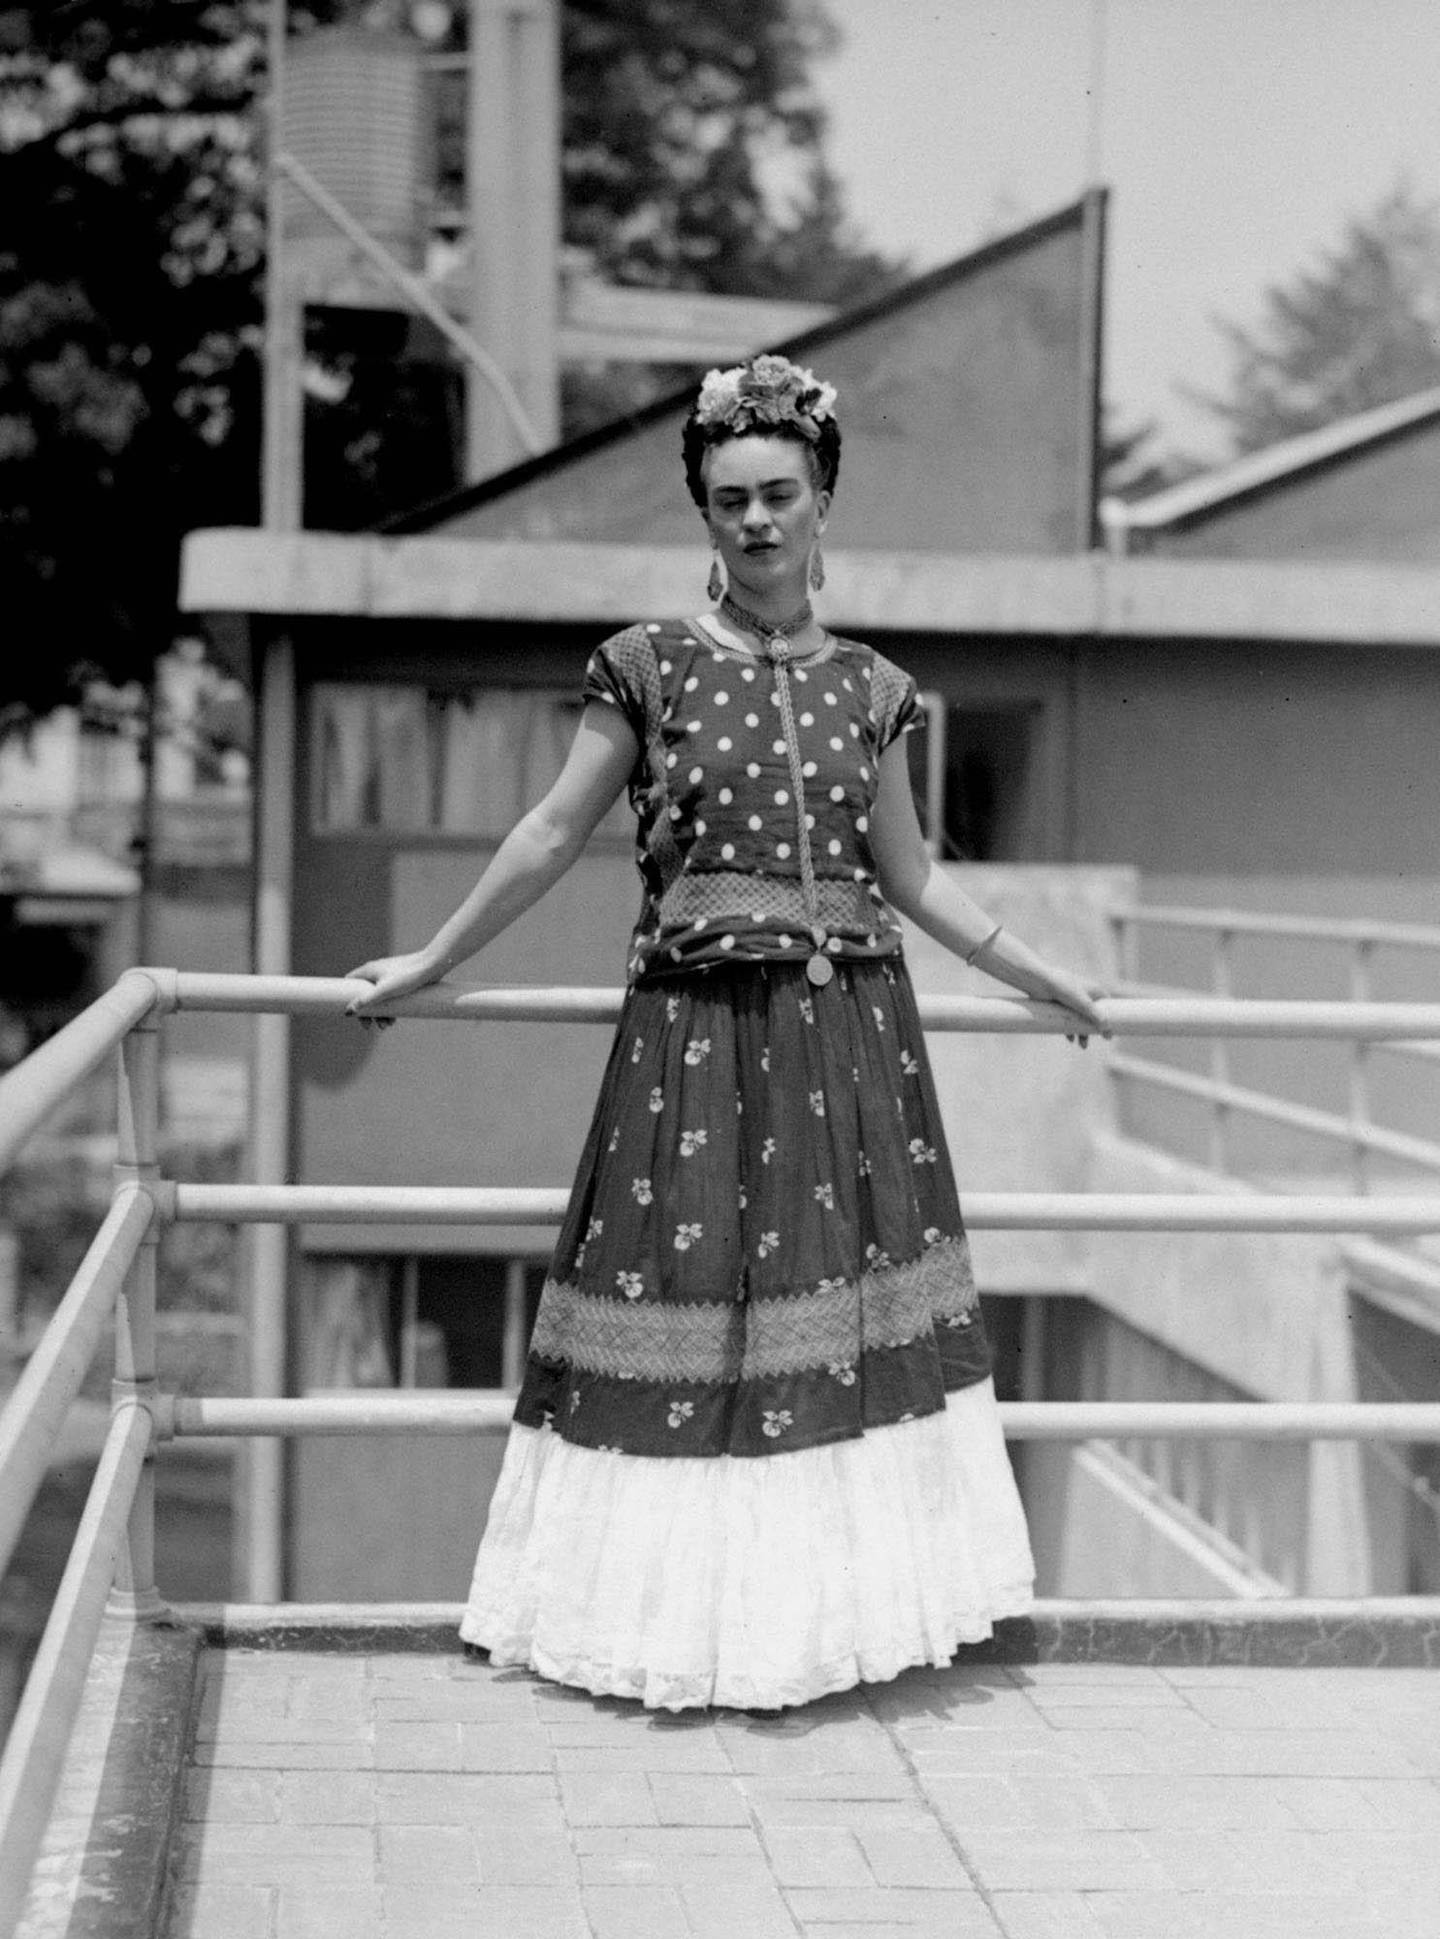 FILE - In this April 14, 1939 file photo, Mexican painter and surrealist Frida Kahlo poses at her home in Mexico City. The New York Botanical Garden is opening an exhibit on May 16, 2015 of Kahlos paintings that focus on the beauty of the natural world. (AP Photo, File)